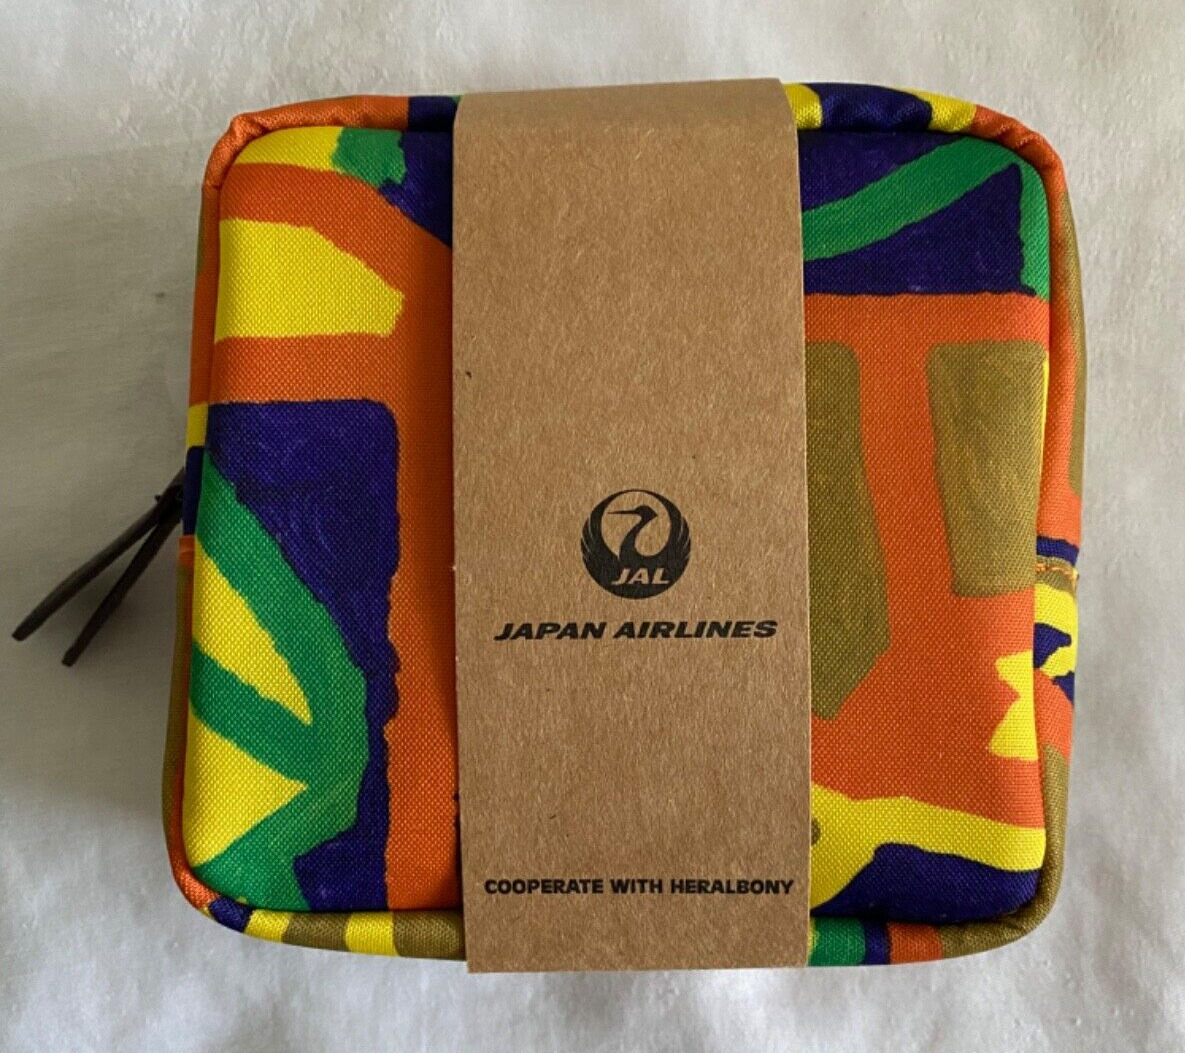 NEW Japan Airlines Heralbony Multicolor Business Class Amenity Kit